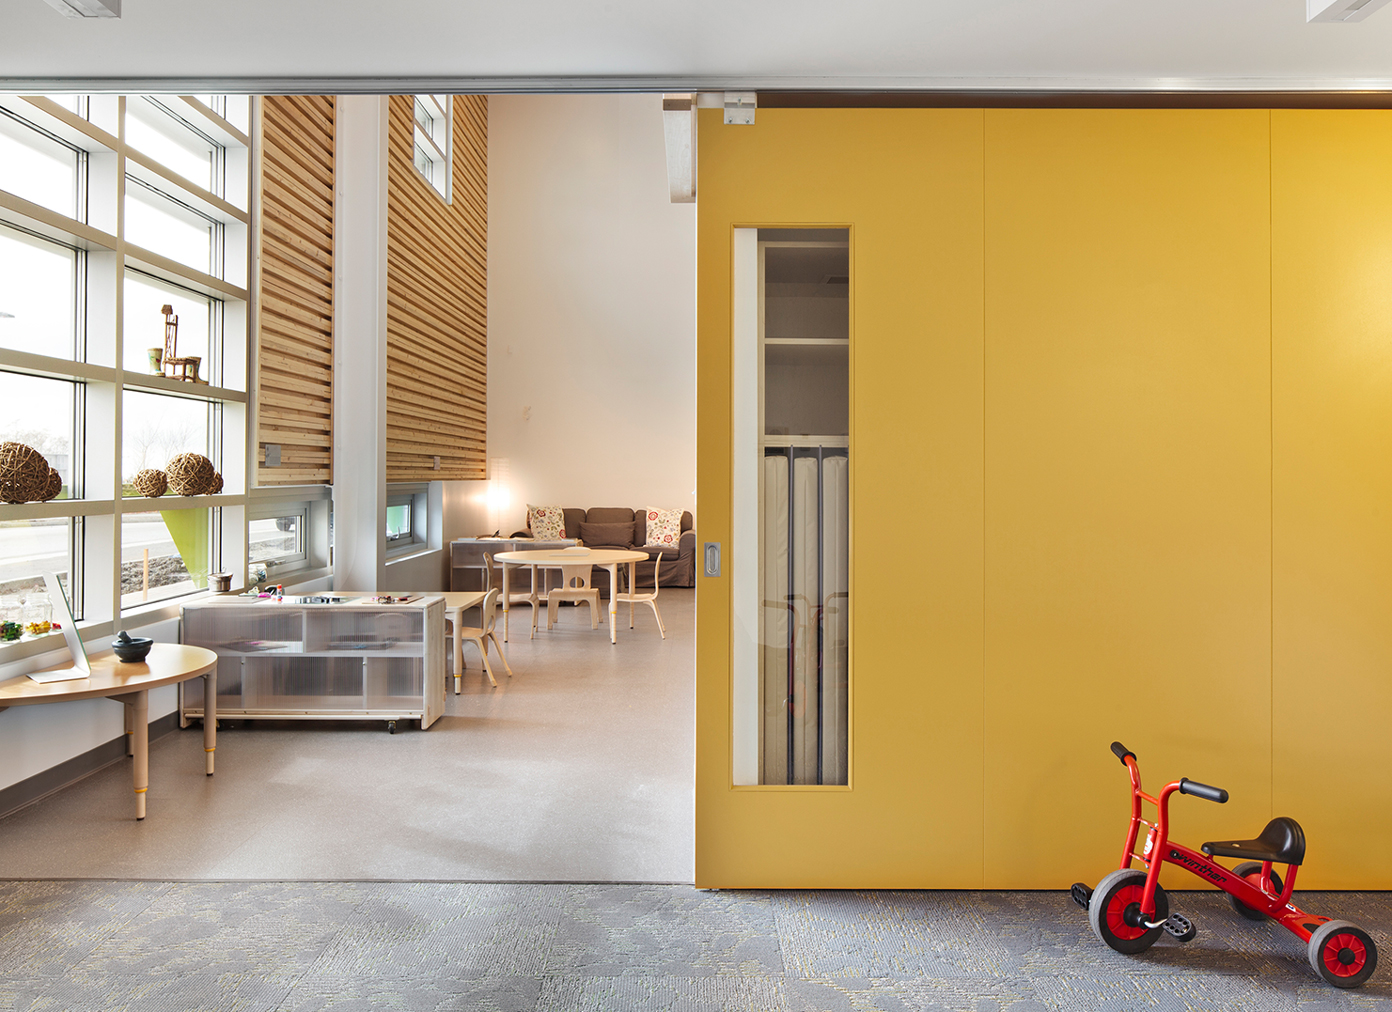 A red tricycle sitting in front of a yellow wall that leads to a classroom with wooden tables and chairs